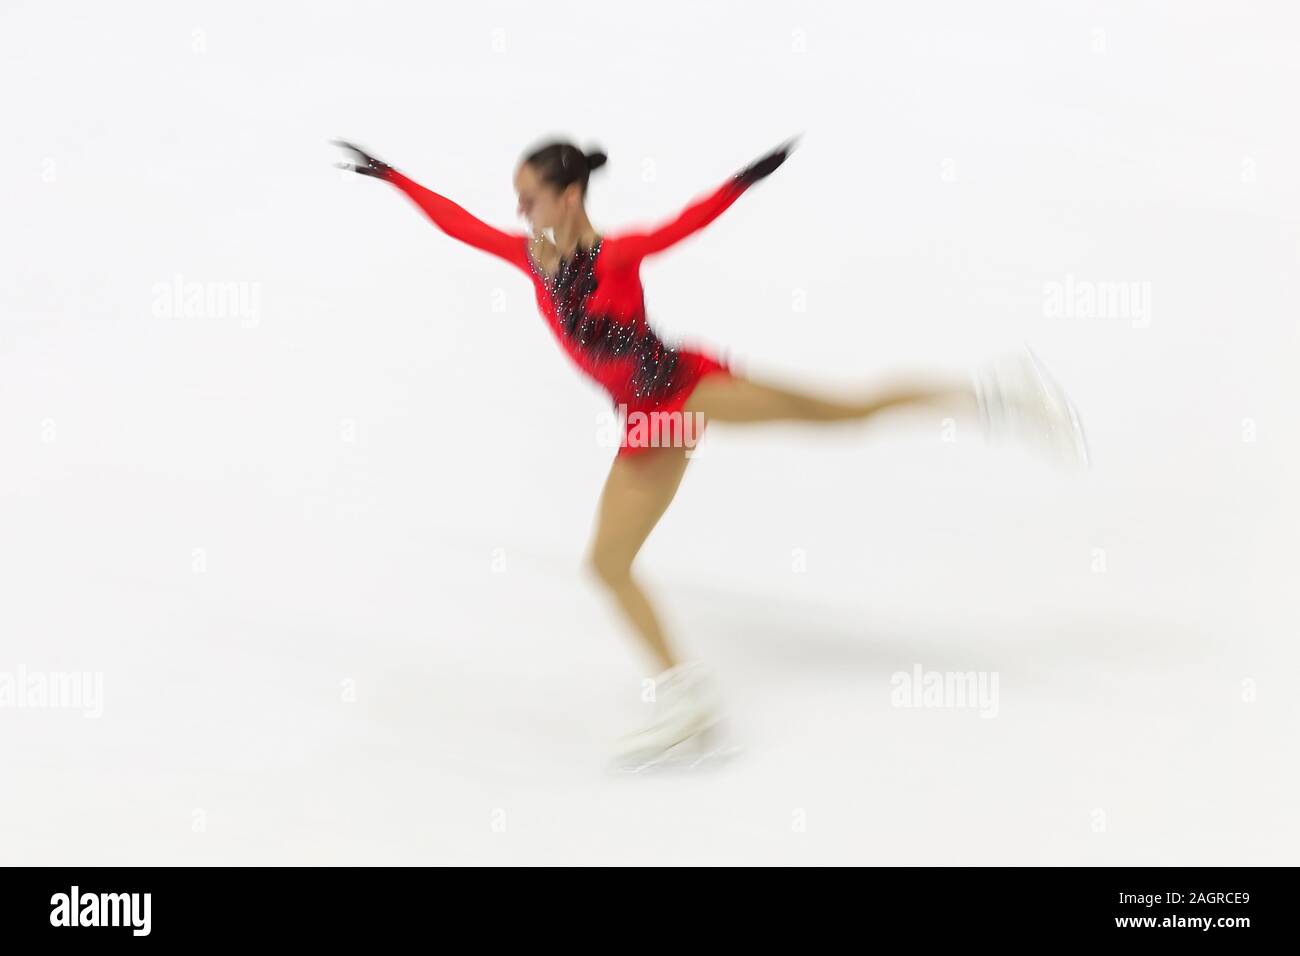 ISTANBUL, TURKEY - NOVEMBER 28, 2019: Blured motion of unidentified Ice skater performs during Bosphorus Cup figure skating championships Stock Photo